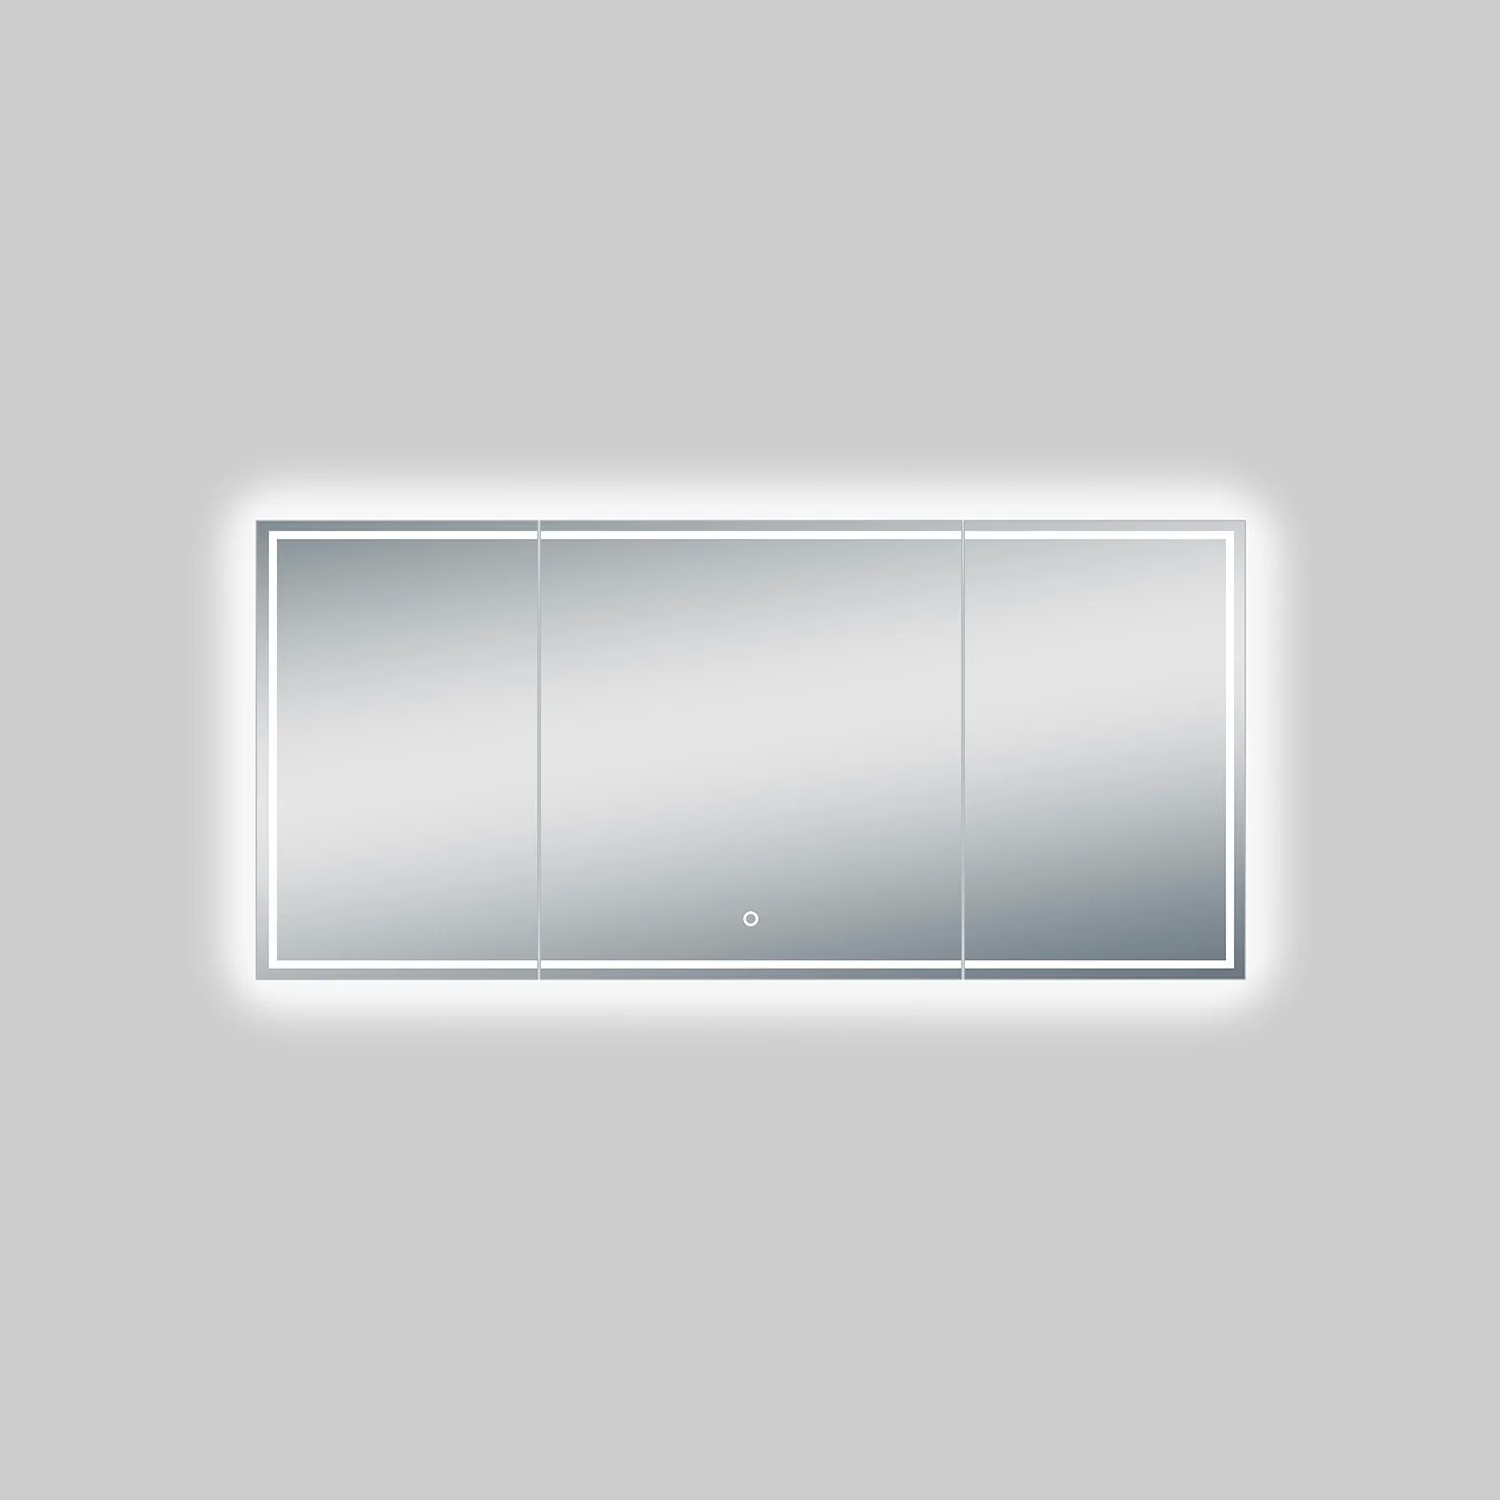 55.1 in. X 25.6 in. Backlit/Frontlit LED Lighted Bathroom Vanity Mirror with Pivoting Side Mirrors, Thin Plexiglass Edge, Anti Fog, Adjustable Color Temperature & Remembrance, Makeup Mirror, Touch Button, Titan Style